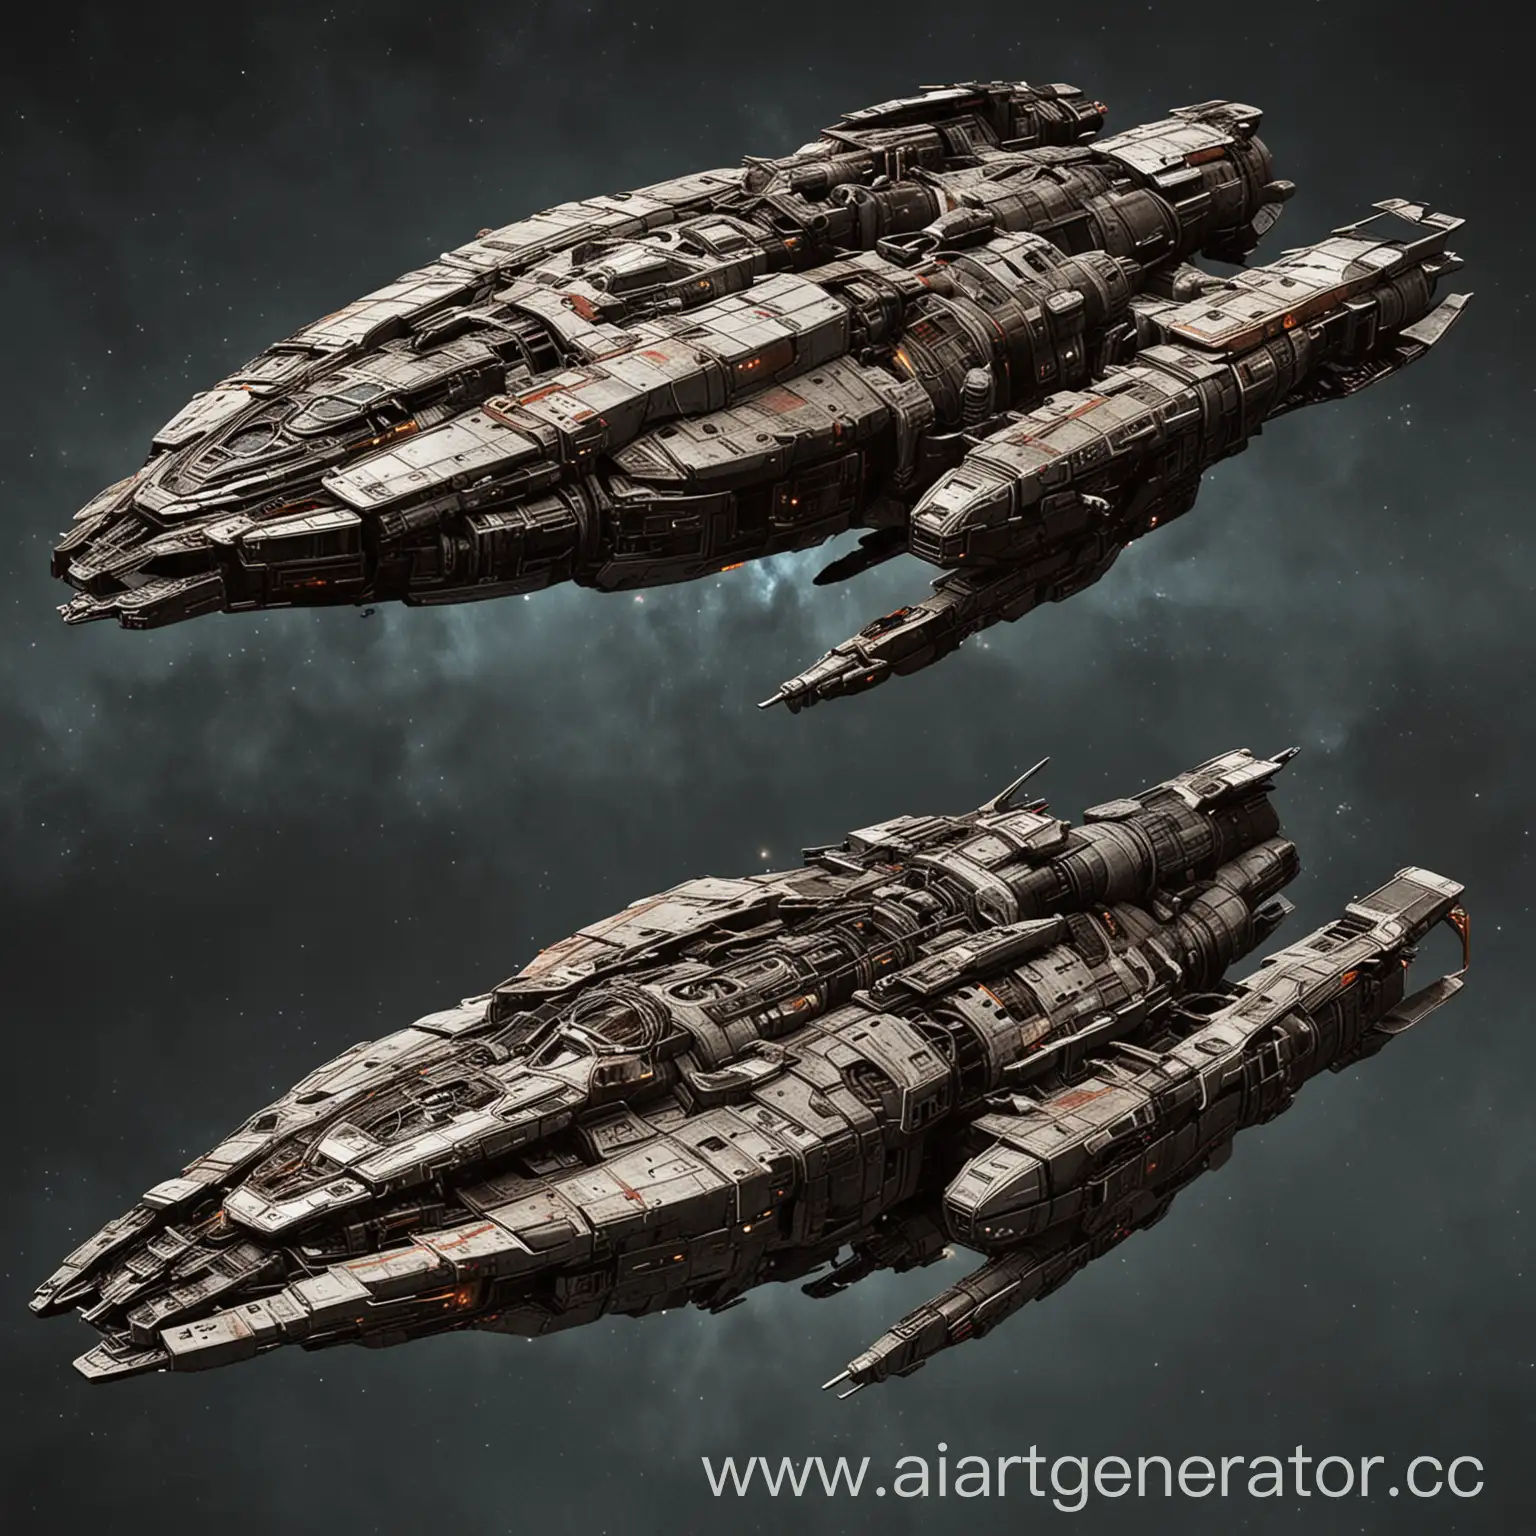 Majestic-Spaceship-Design-Inspired-by-Dead-Space-and-Mass-Effect-with-Engine-Details